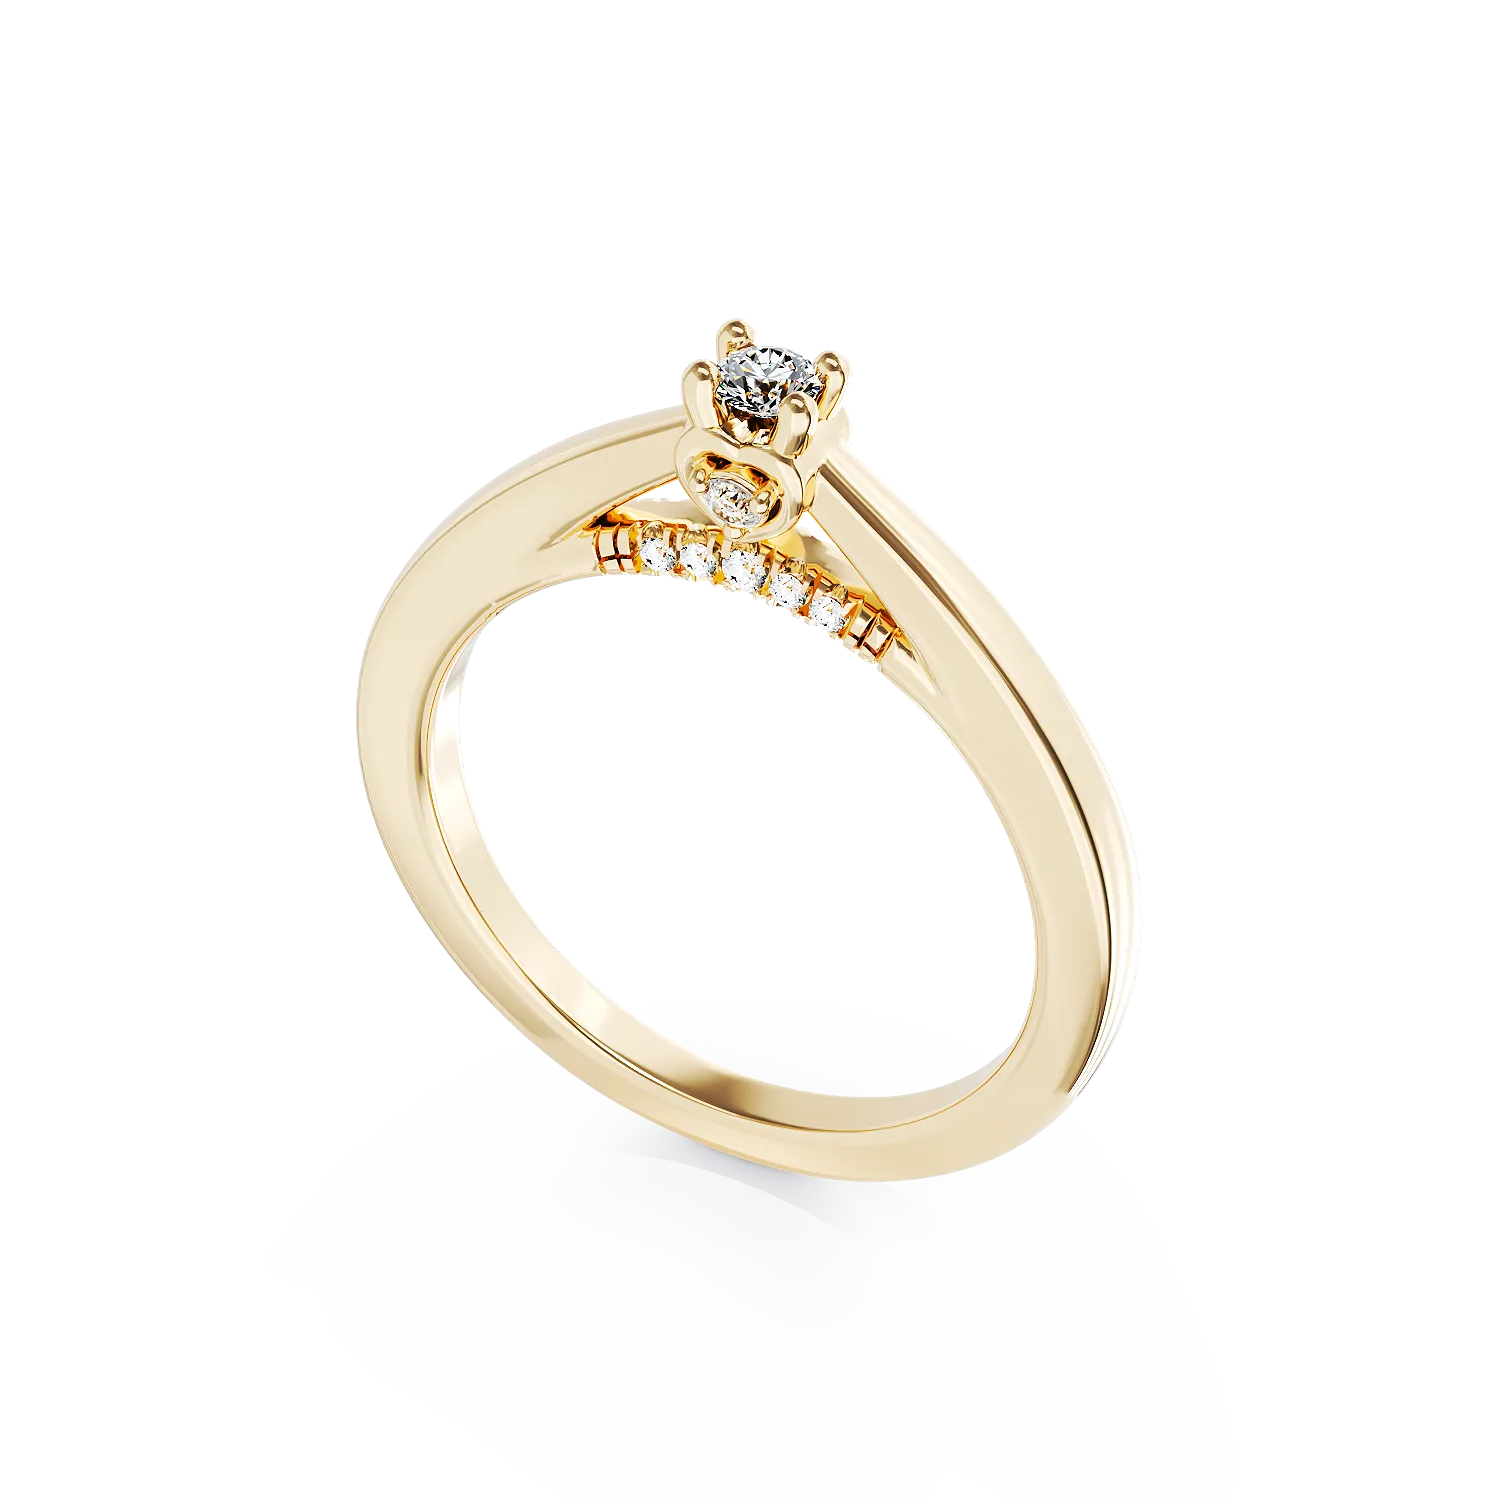 18K yellow gold engagement ring with 0.12ct diamond and 0.05ct diamonds